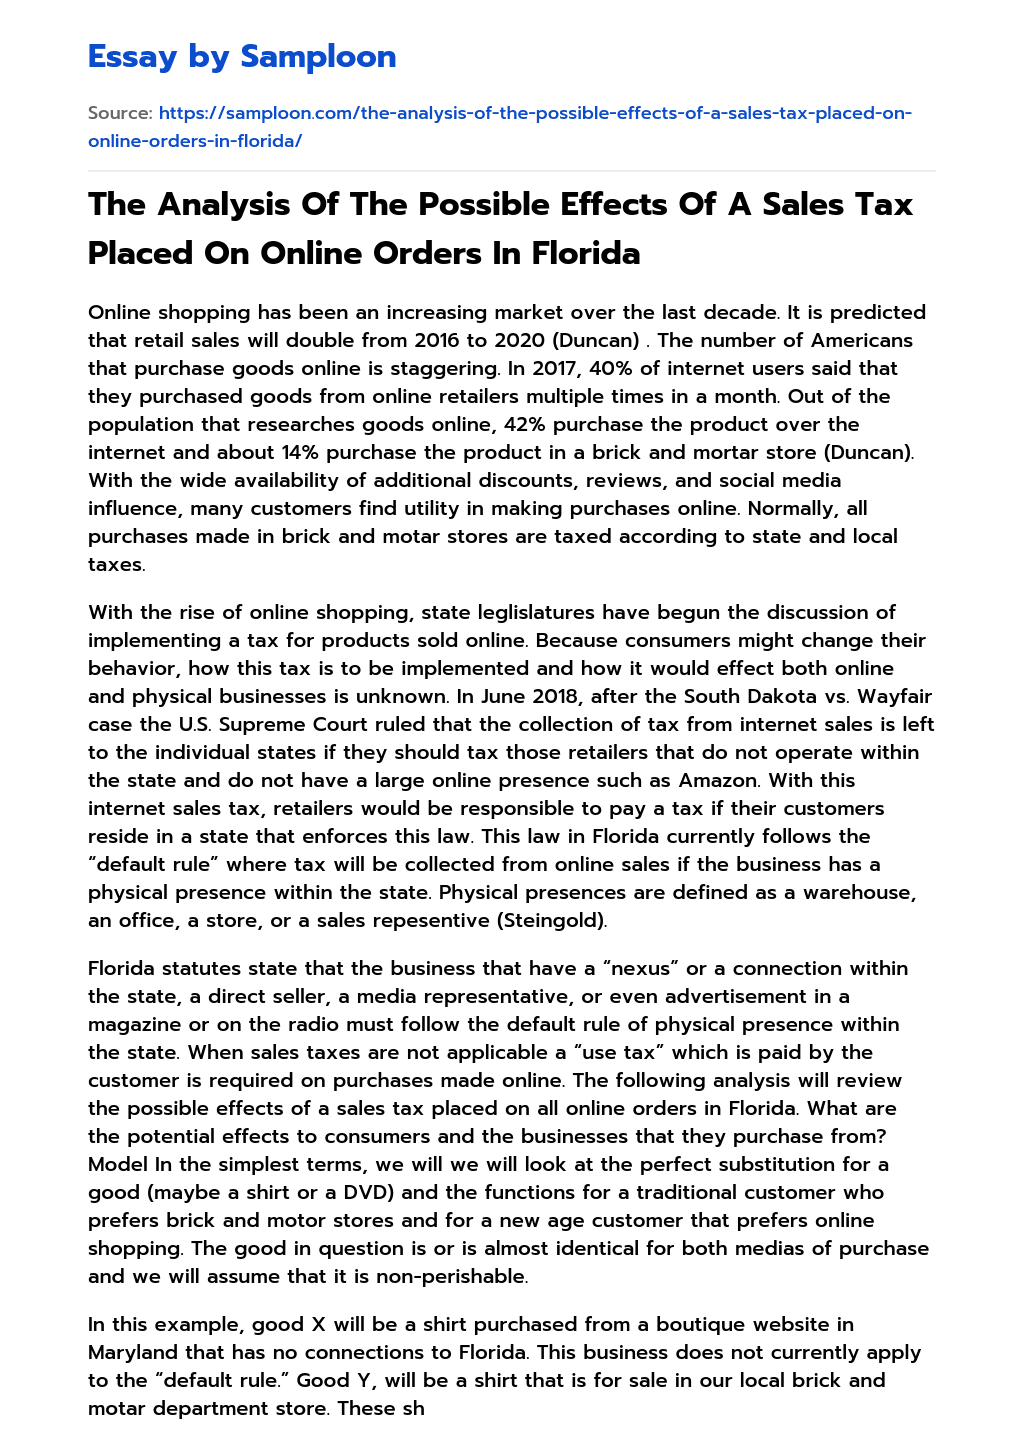 The Analysis Of The Possible Effects Of A Sales Tax Placed On Online Orders In Florida essay